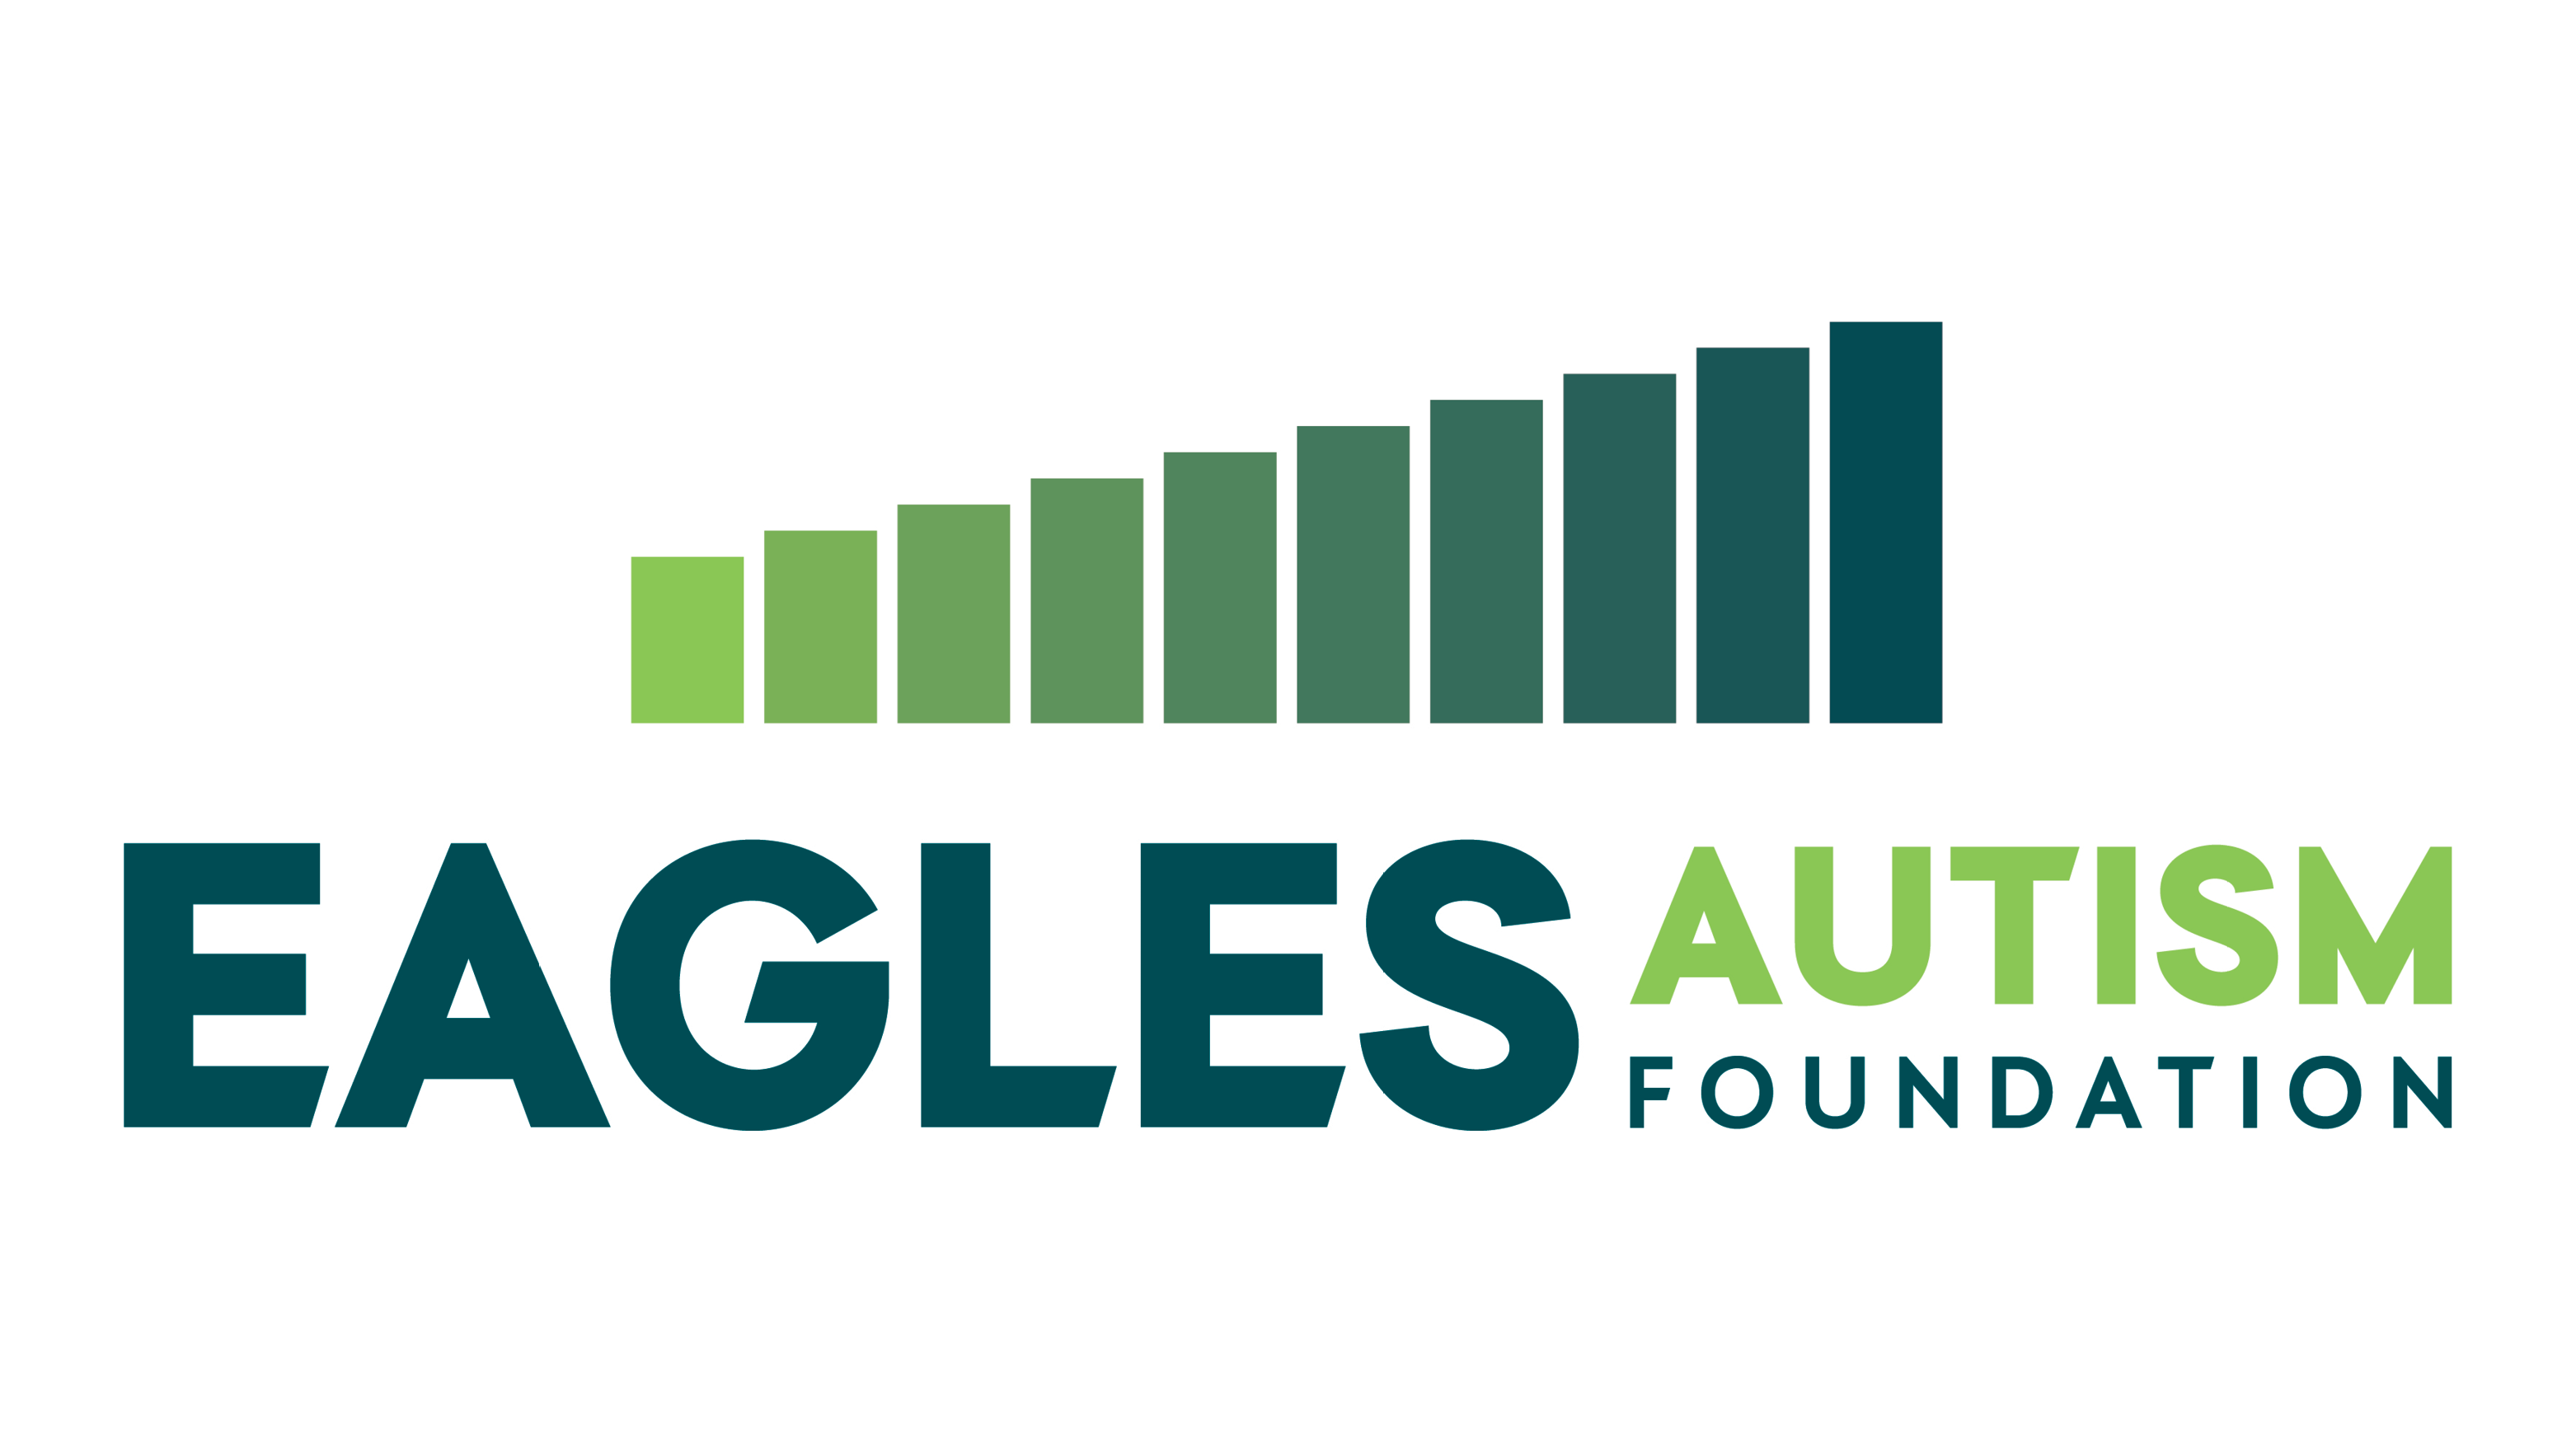 The Eagles Autism Foundation is a Lecture and Event sponsor of Neuroscience 2021.